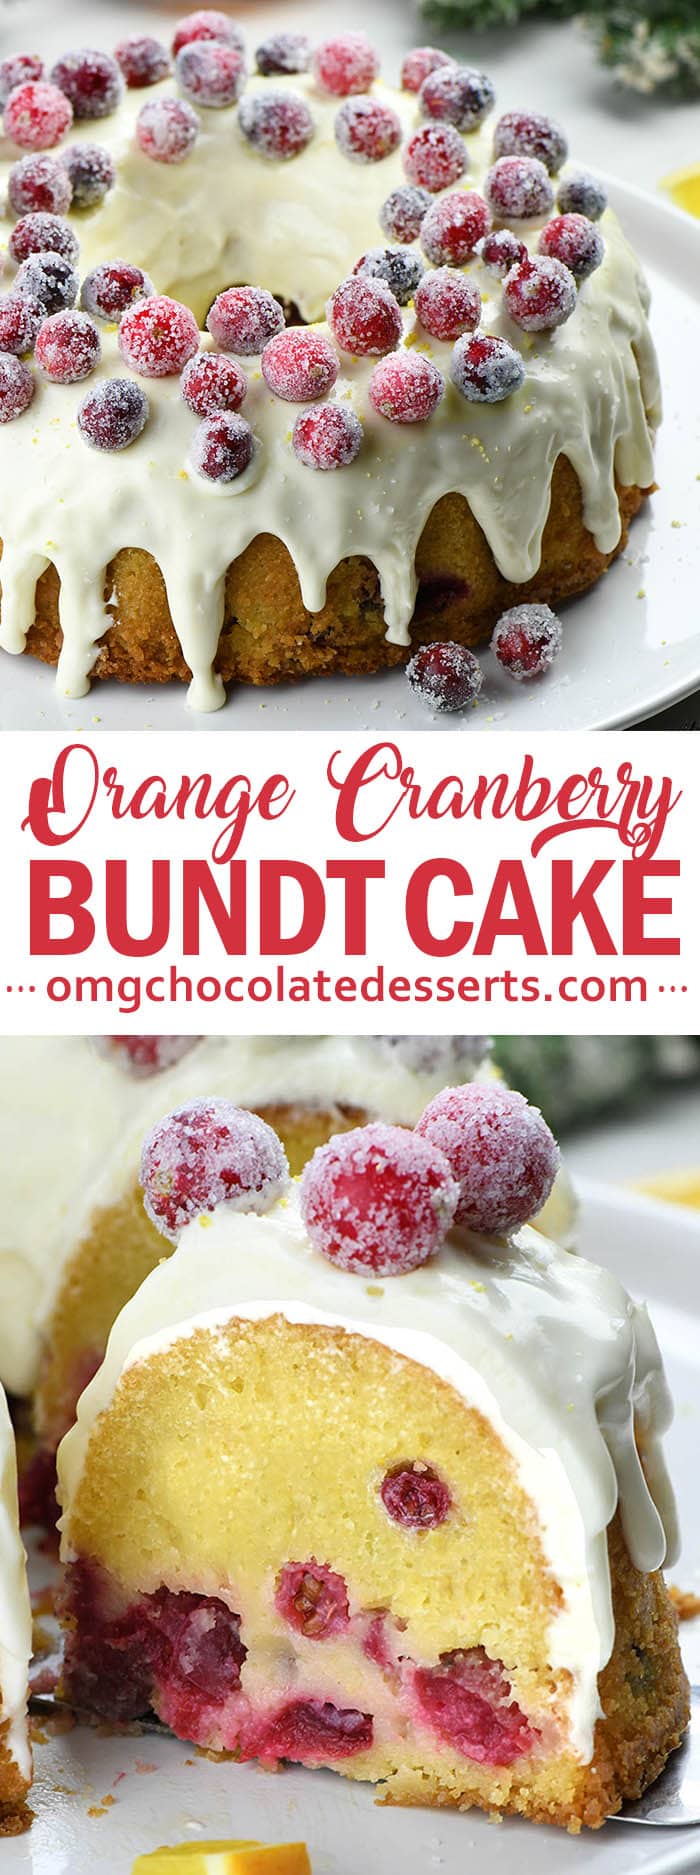 Orange Cranberry Bundt Cake - super moist orange cake dotted with cranberries that simply scream Christmas.